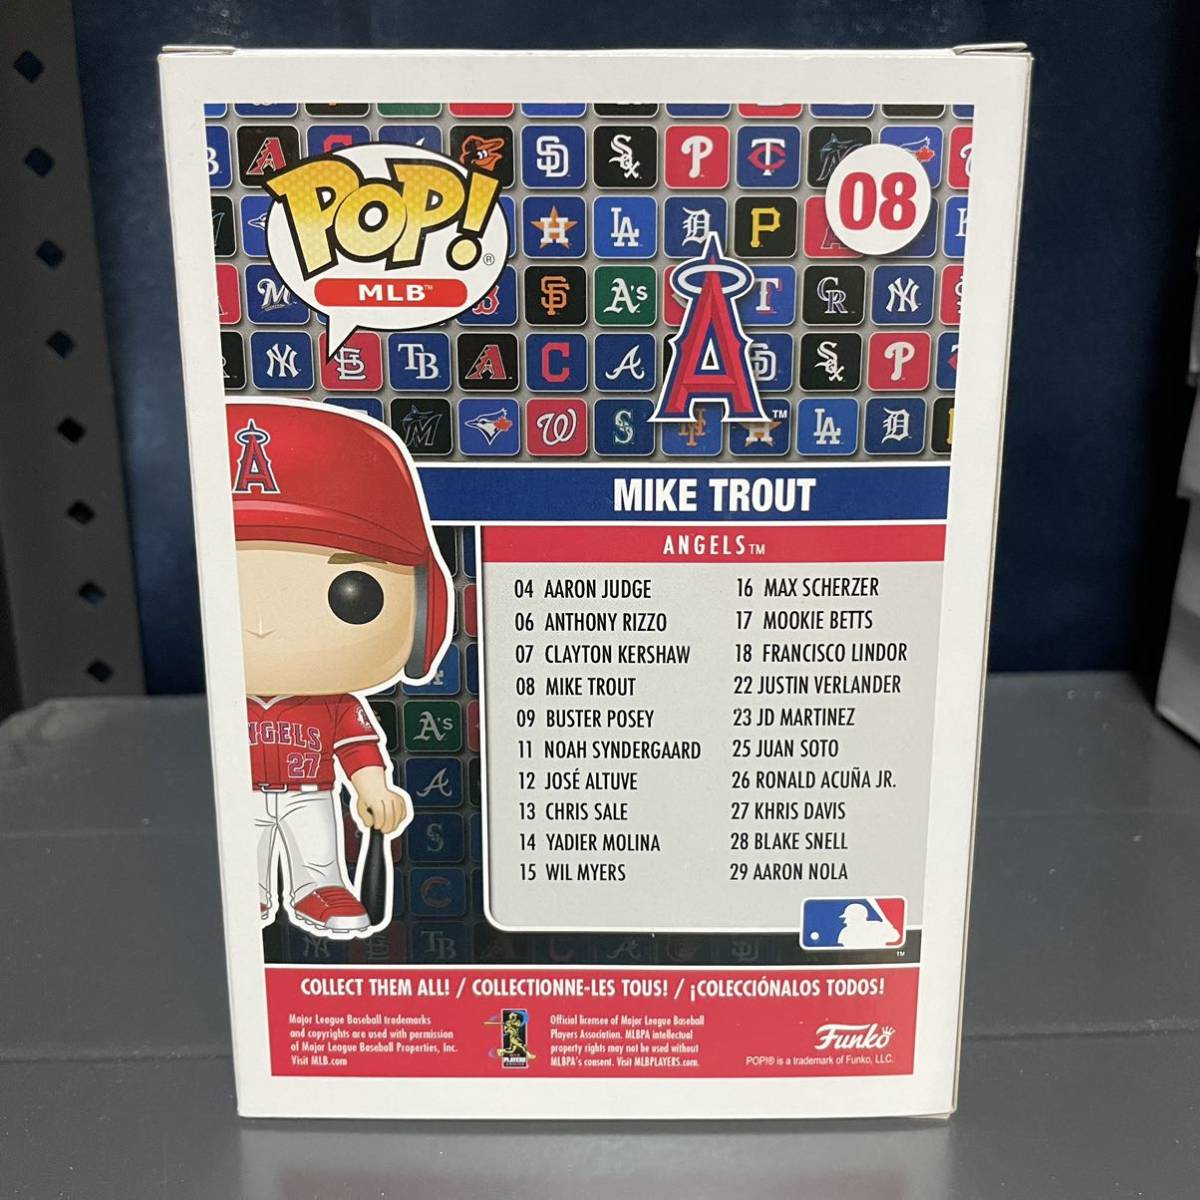 [ domestic not yet sale ] new goods Mike * trout Funko pop MLB New Jersy figure Mike Trout 08 Los Angeles enzerusLos Angeles Angels